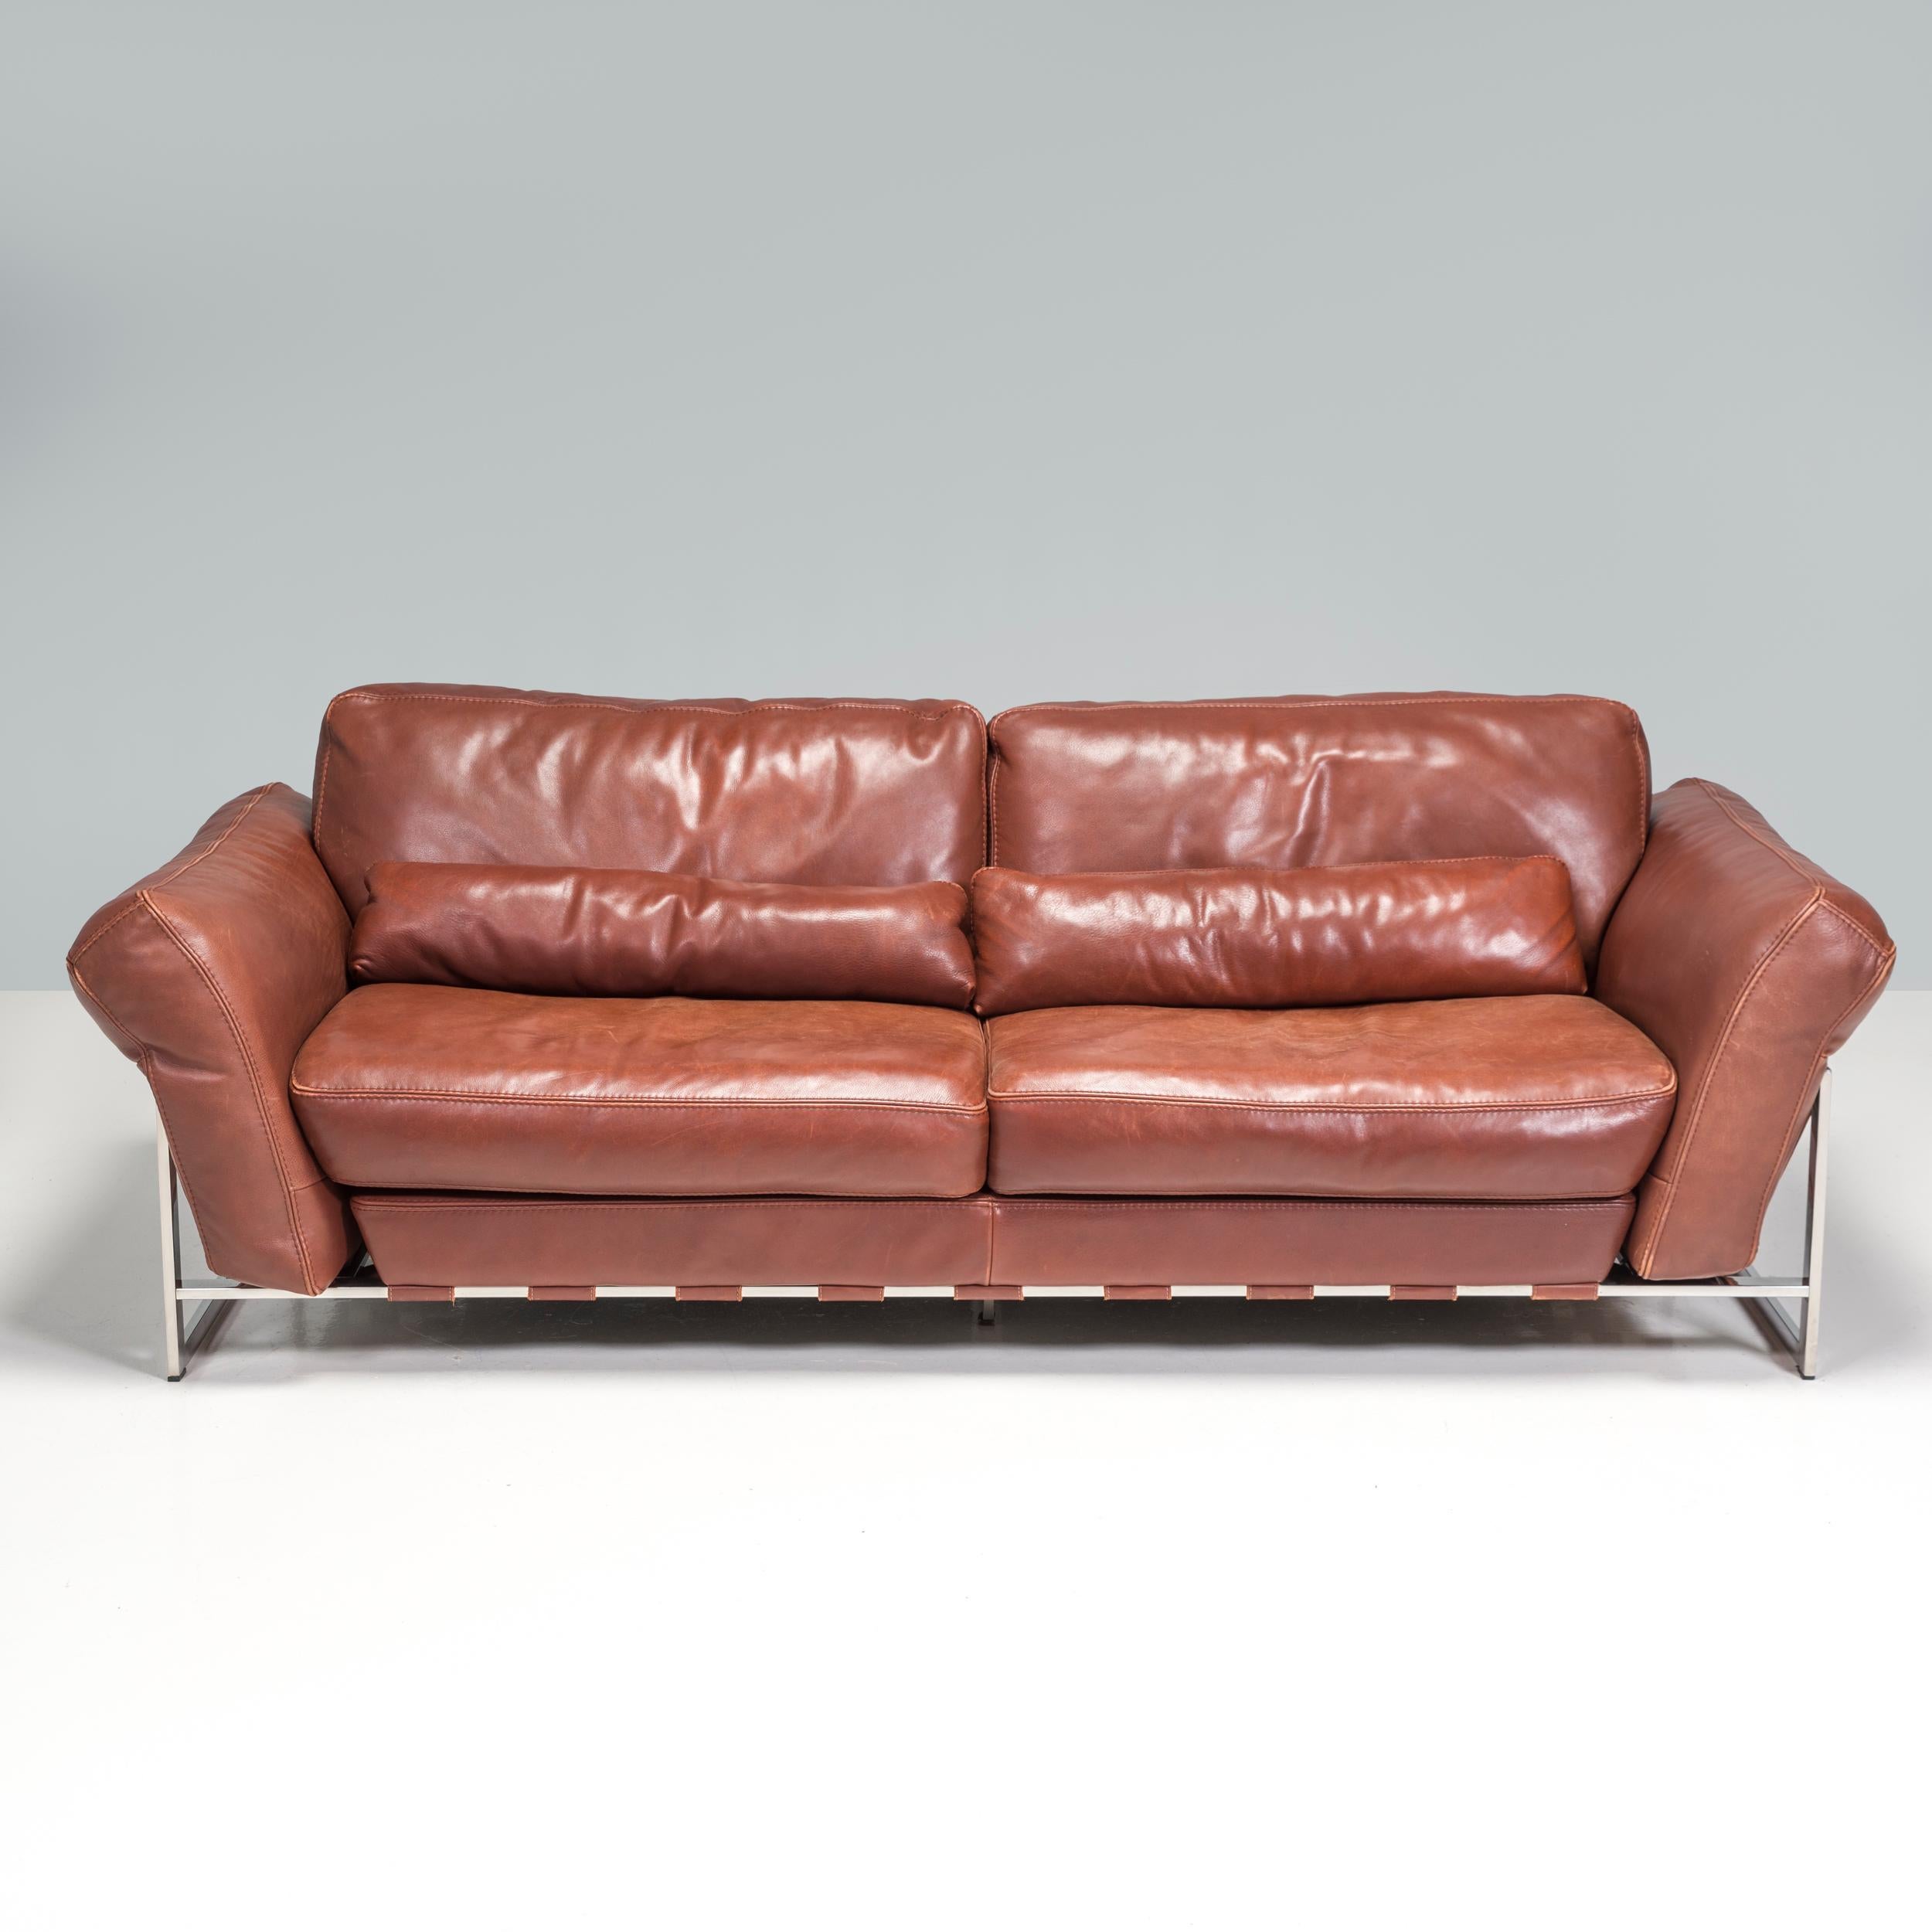 Designed and manufactured by Roche Bobois, this sofa is the perfect balance of comfort and style.

Featuring an angular polished chrome frame, the sofa has contrasting brown leather strapping which creates the structure to hold the